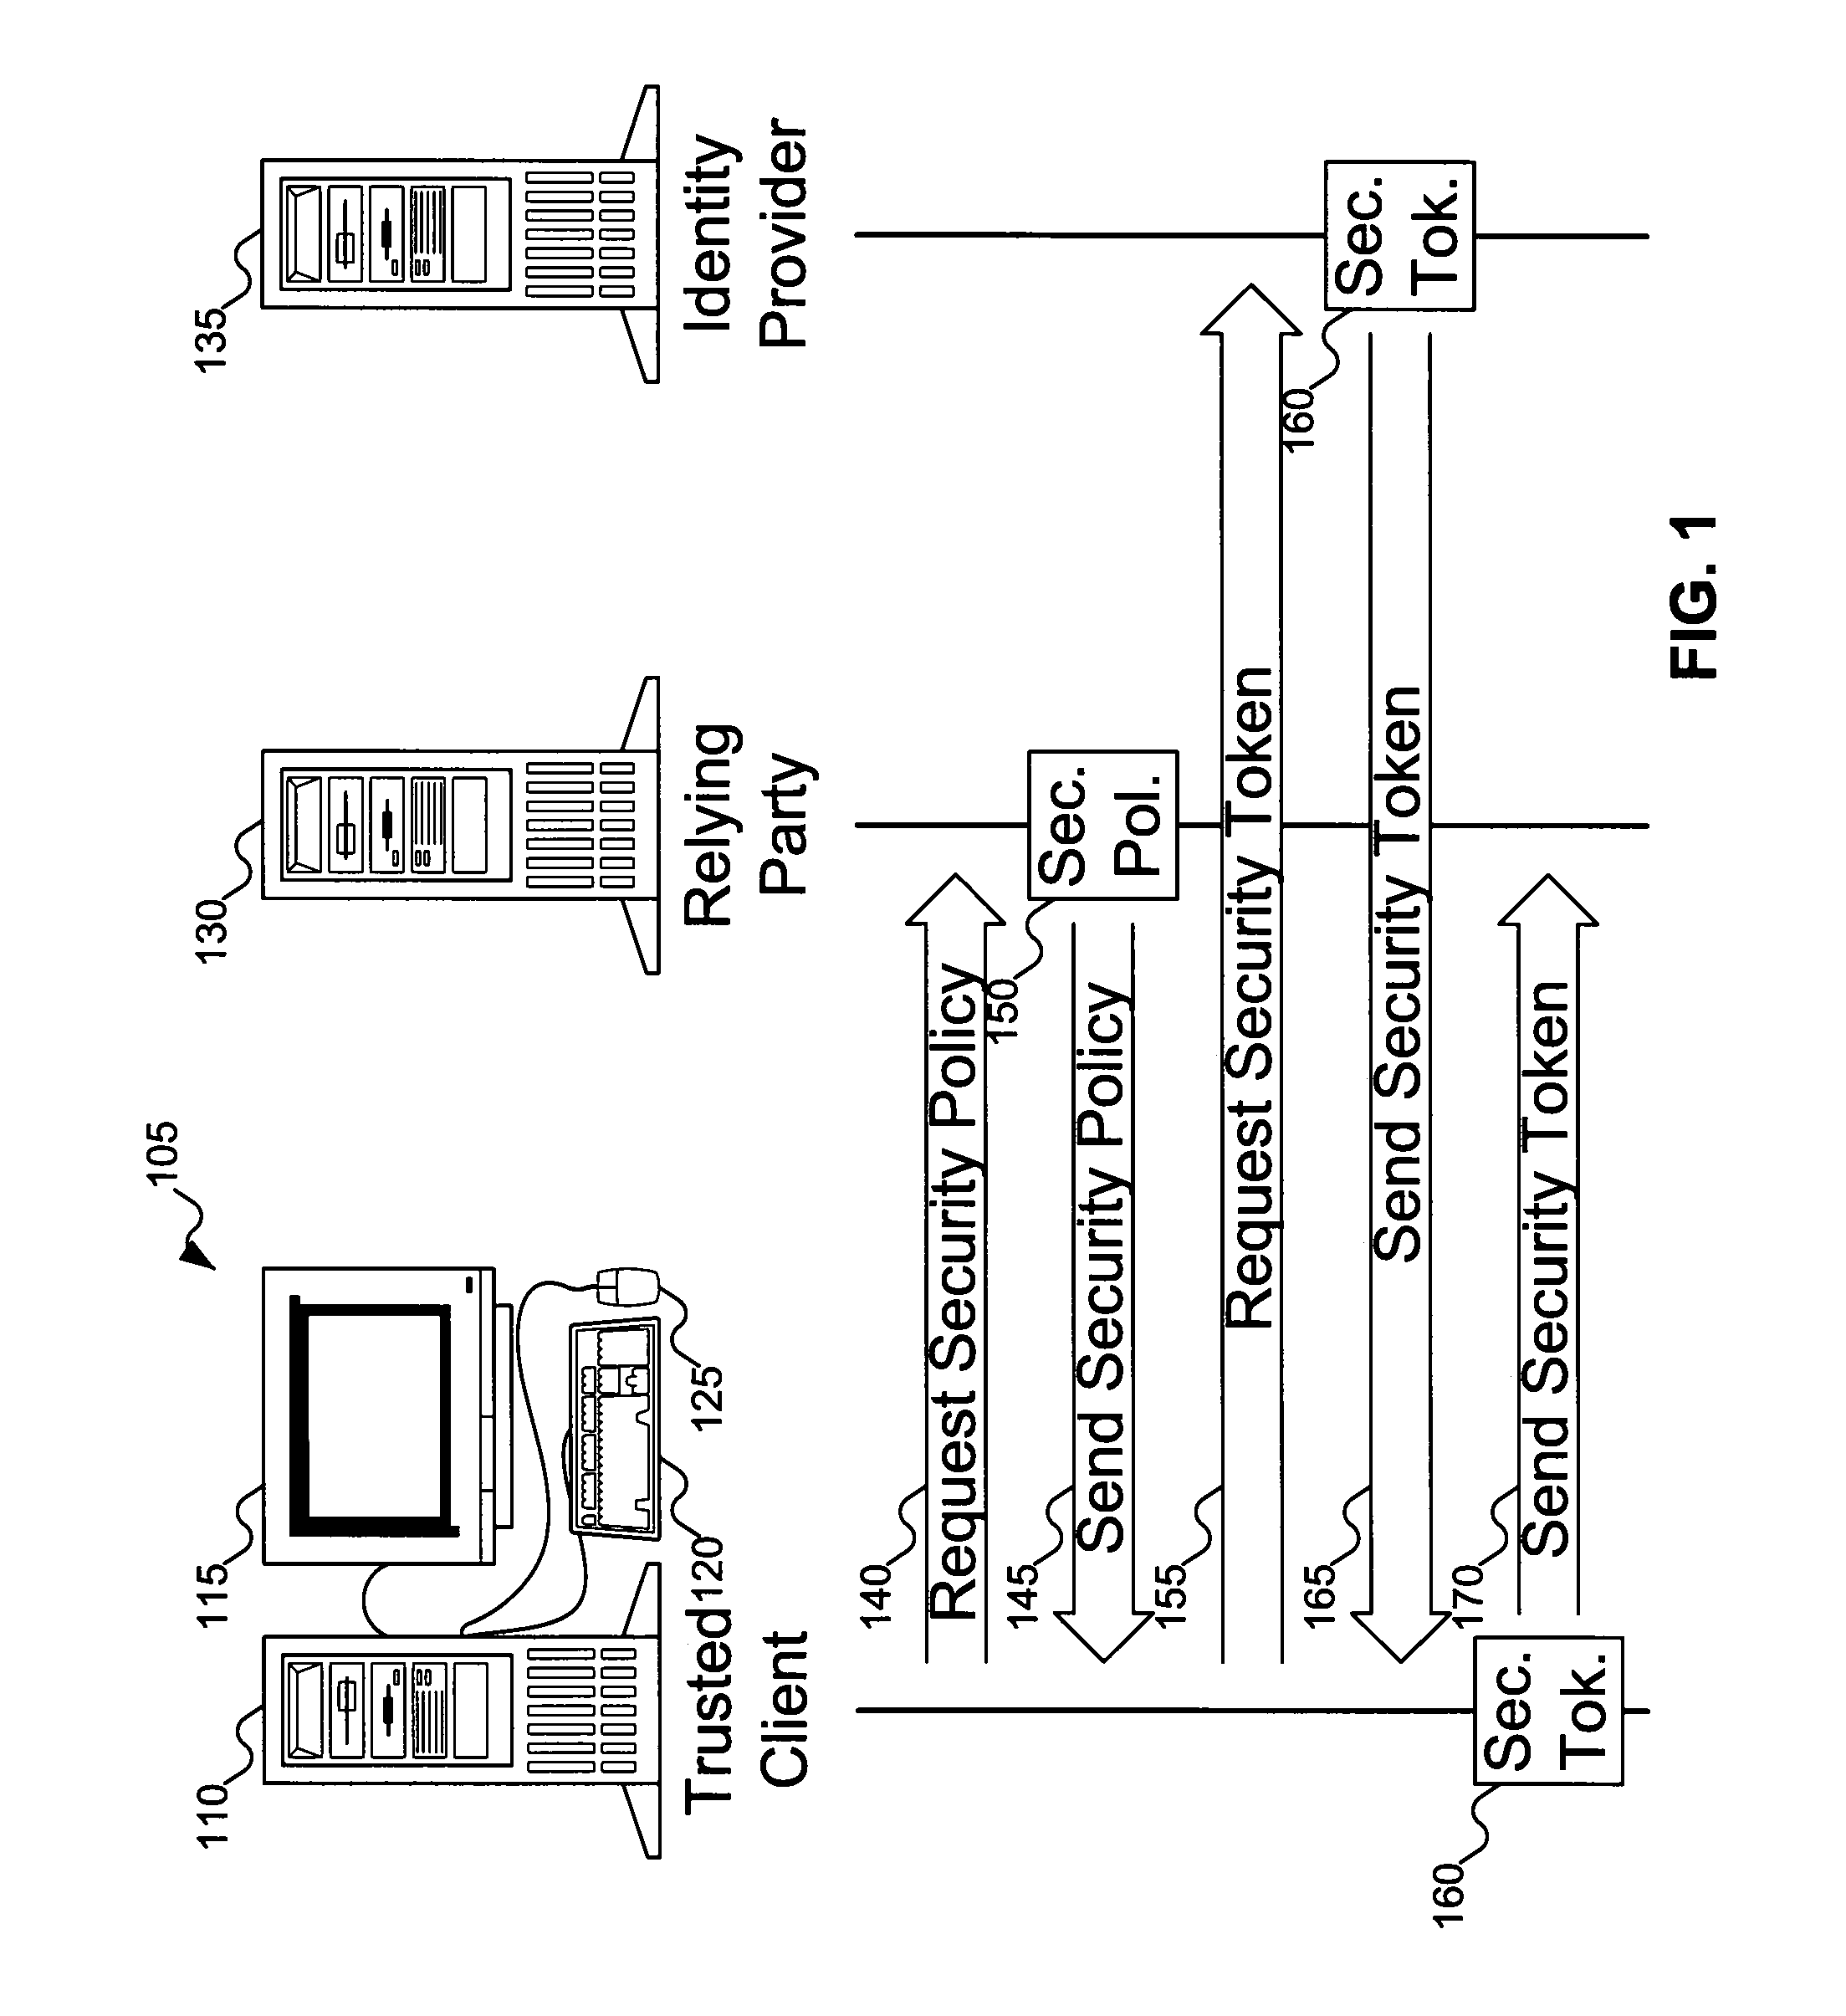 System and method for application-integrated information card selection